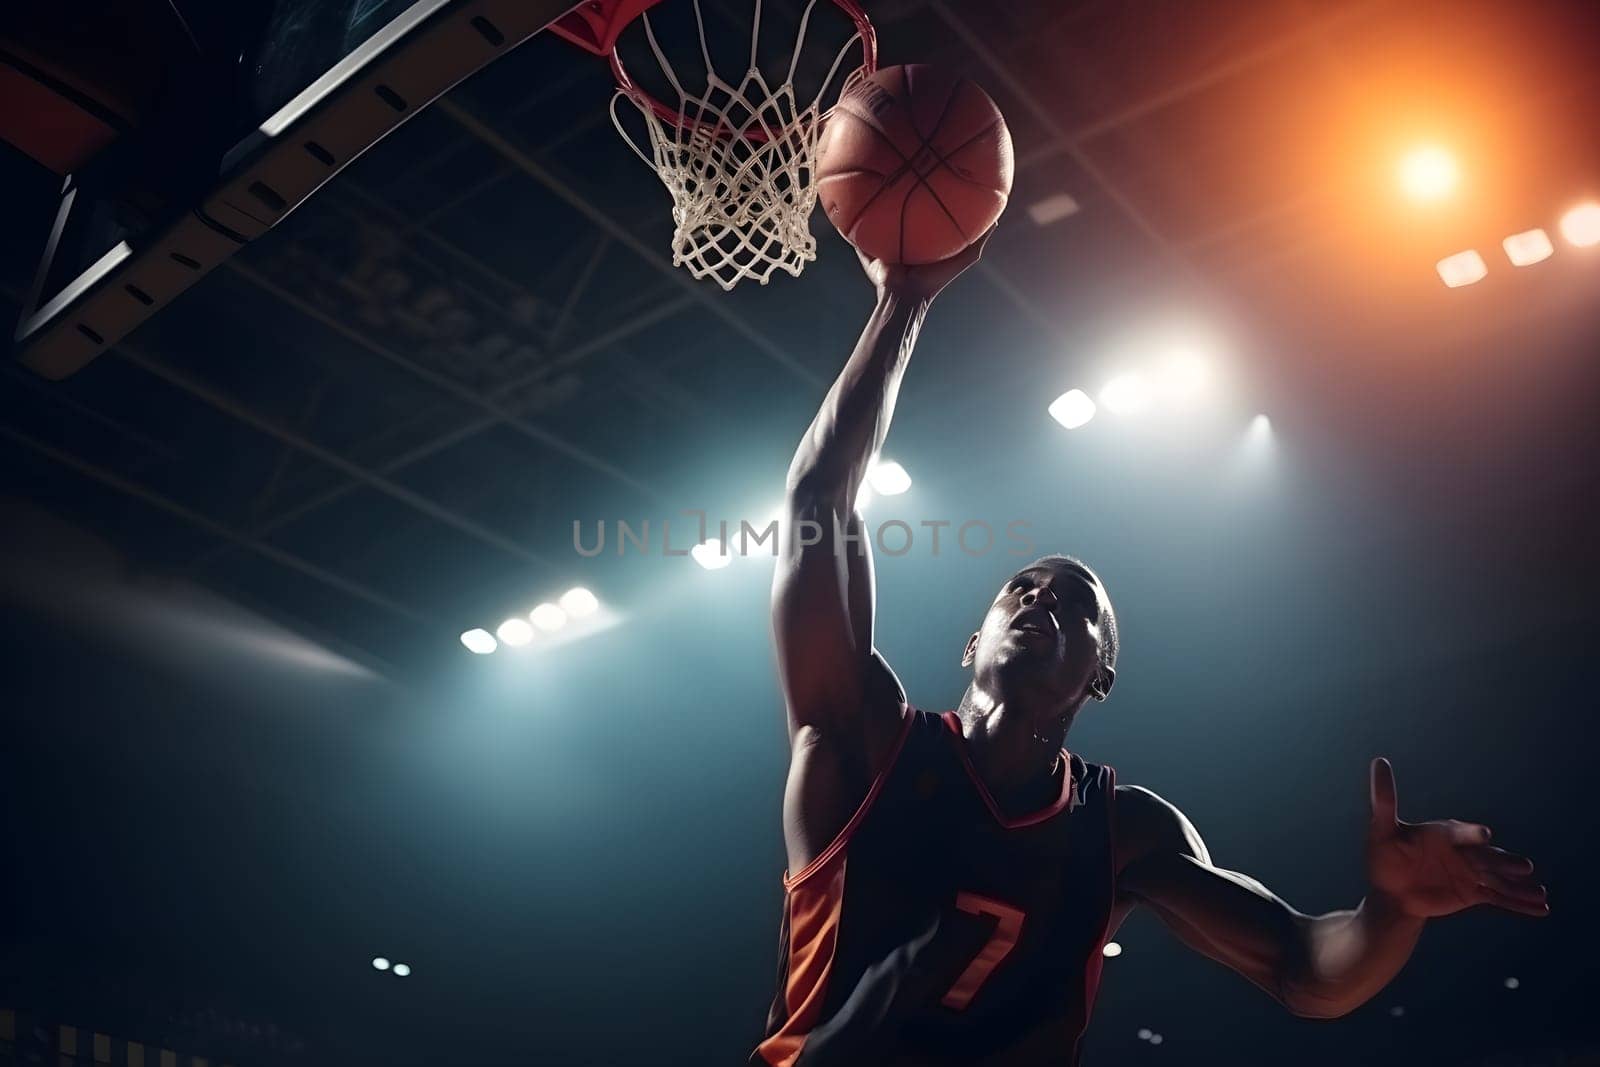 African-American athlete-player scores a ball in the basket by audiznam2609